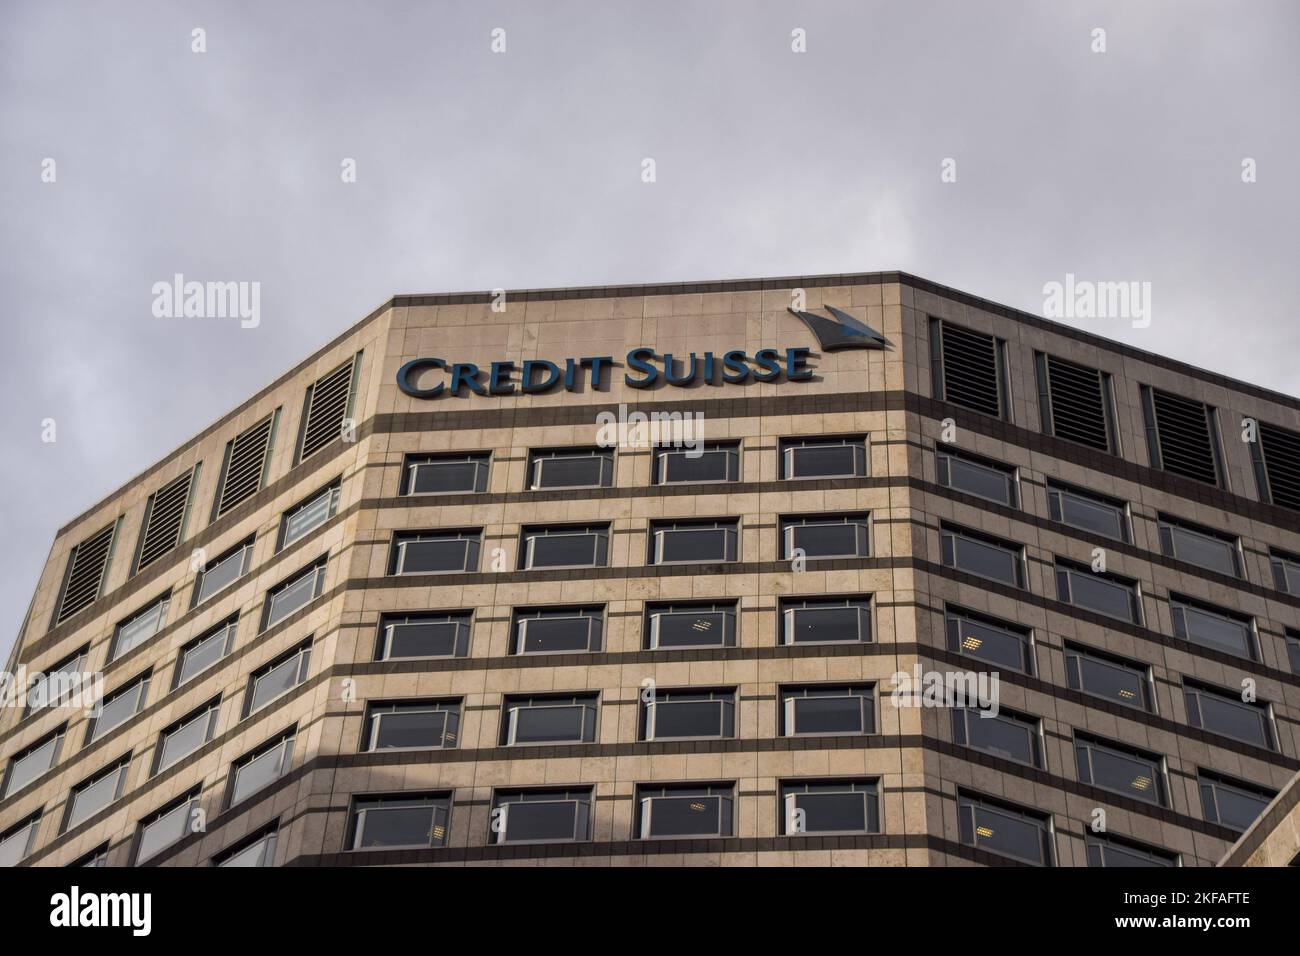 London, UK. 17th November 2022. Exterior view of Credit Suisse UK headquarters in Canary Wharf. Stock Photo